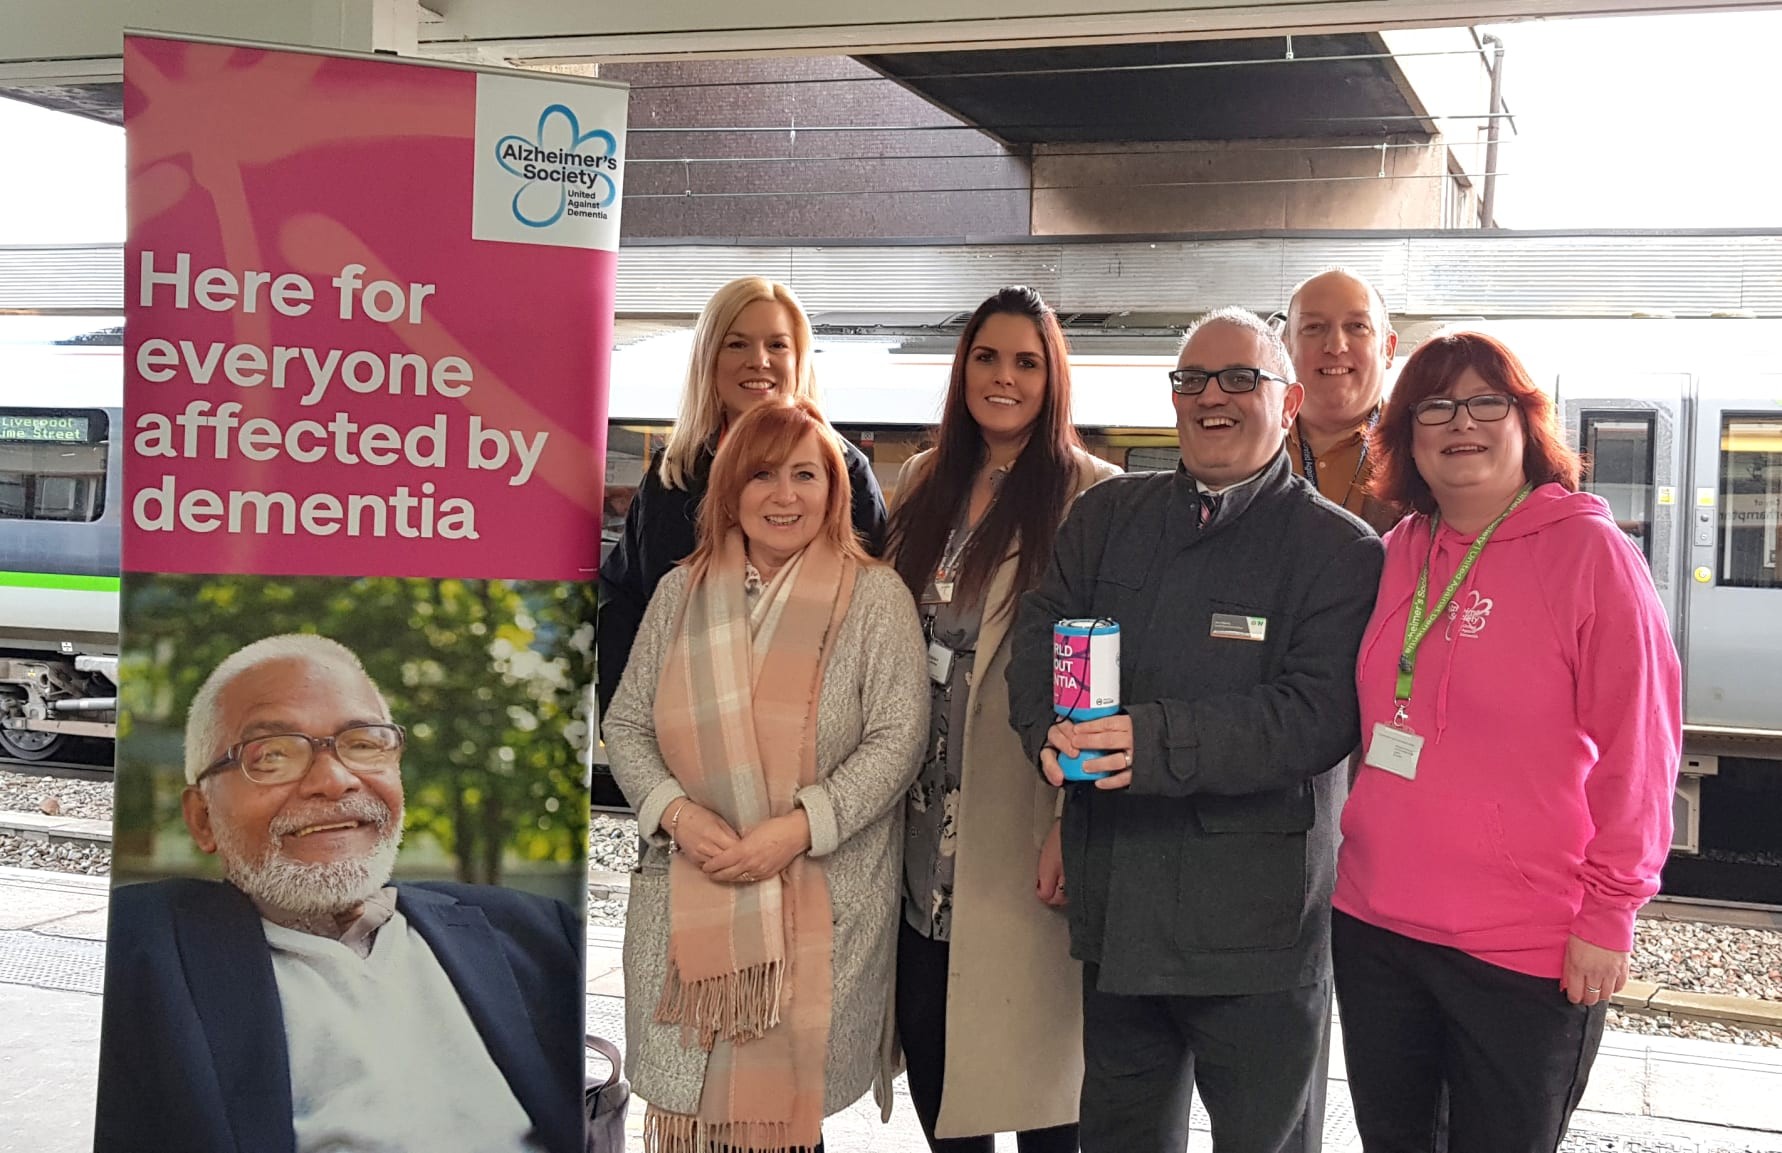 Staff commit to making rail travel more dementia friendly